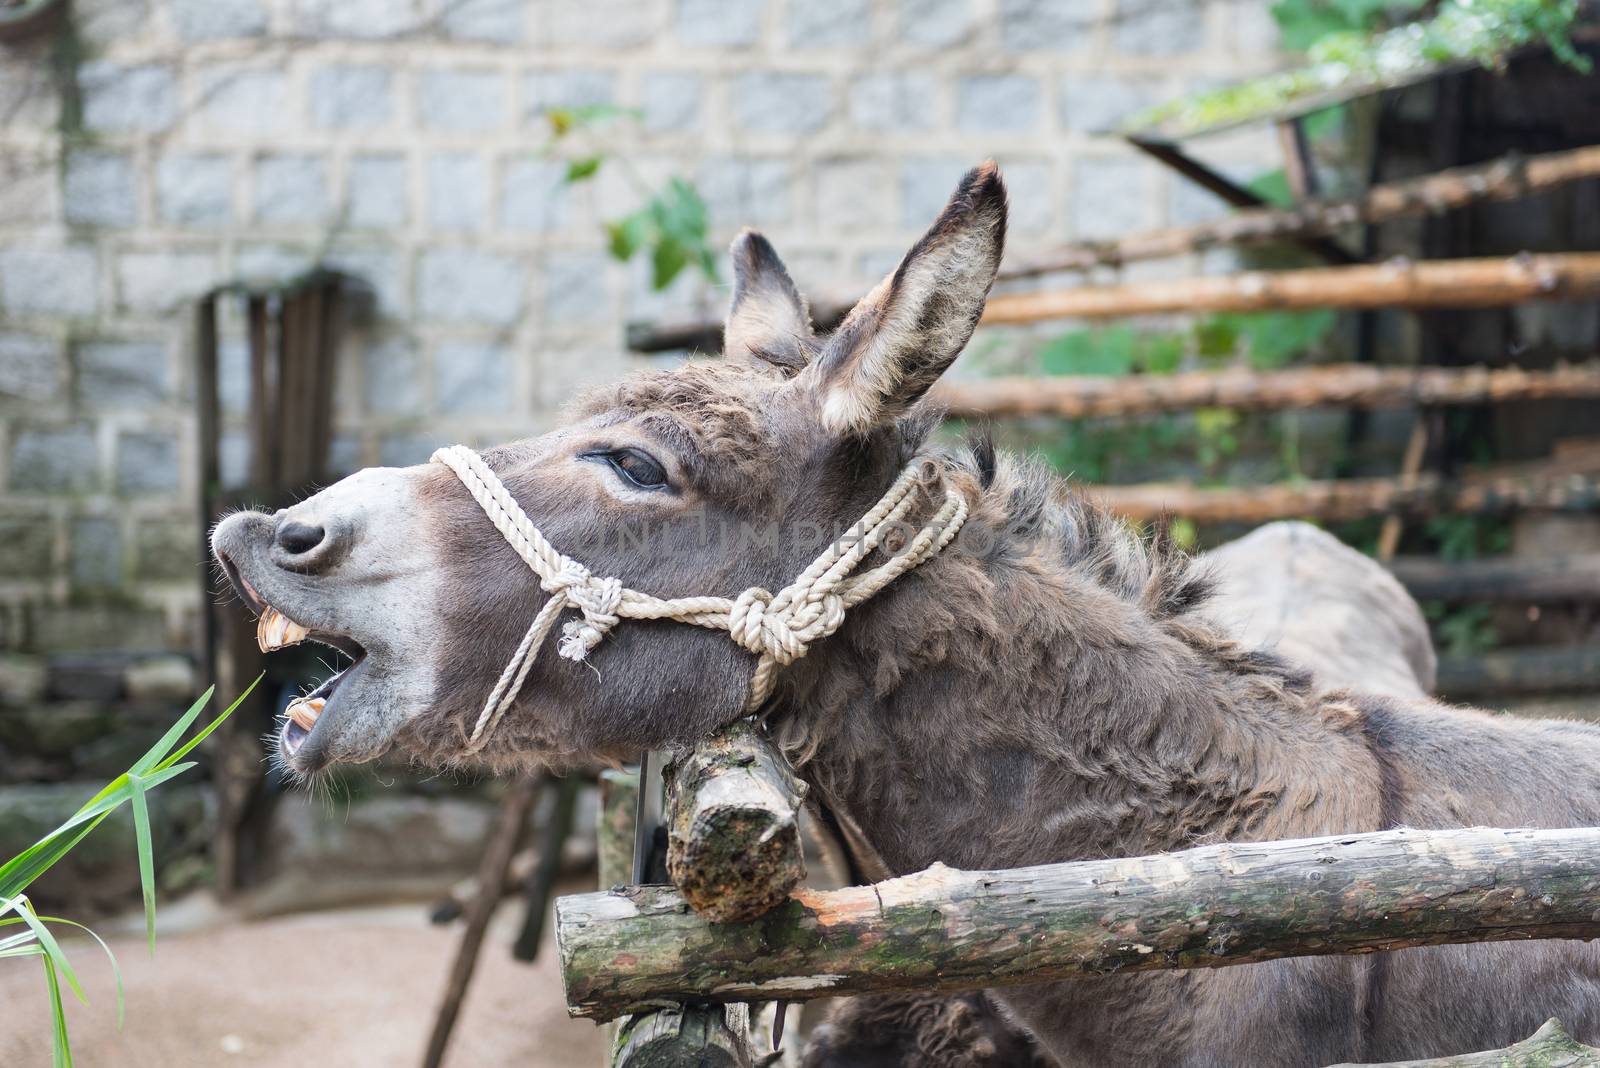 Grey donkey in tis enclosure with rope around the head as halter eating grass